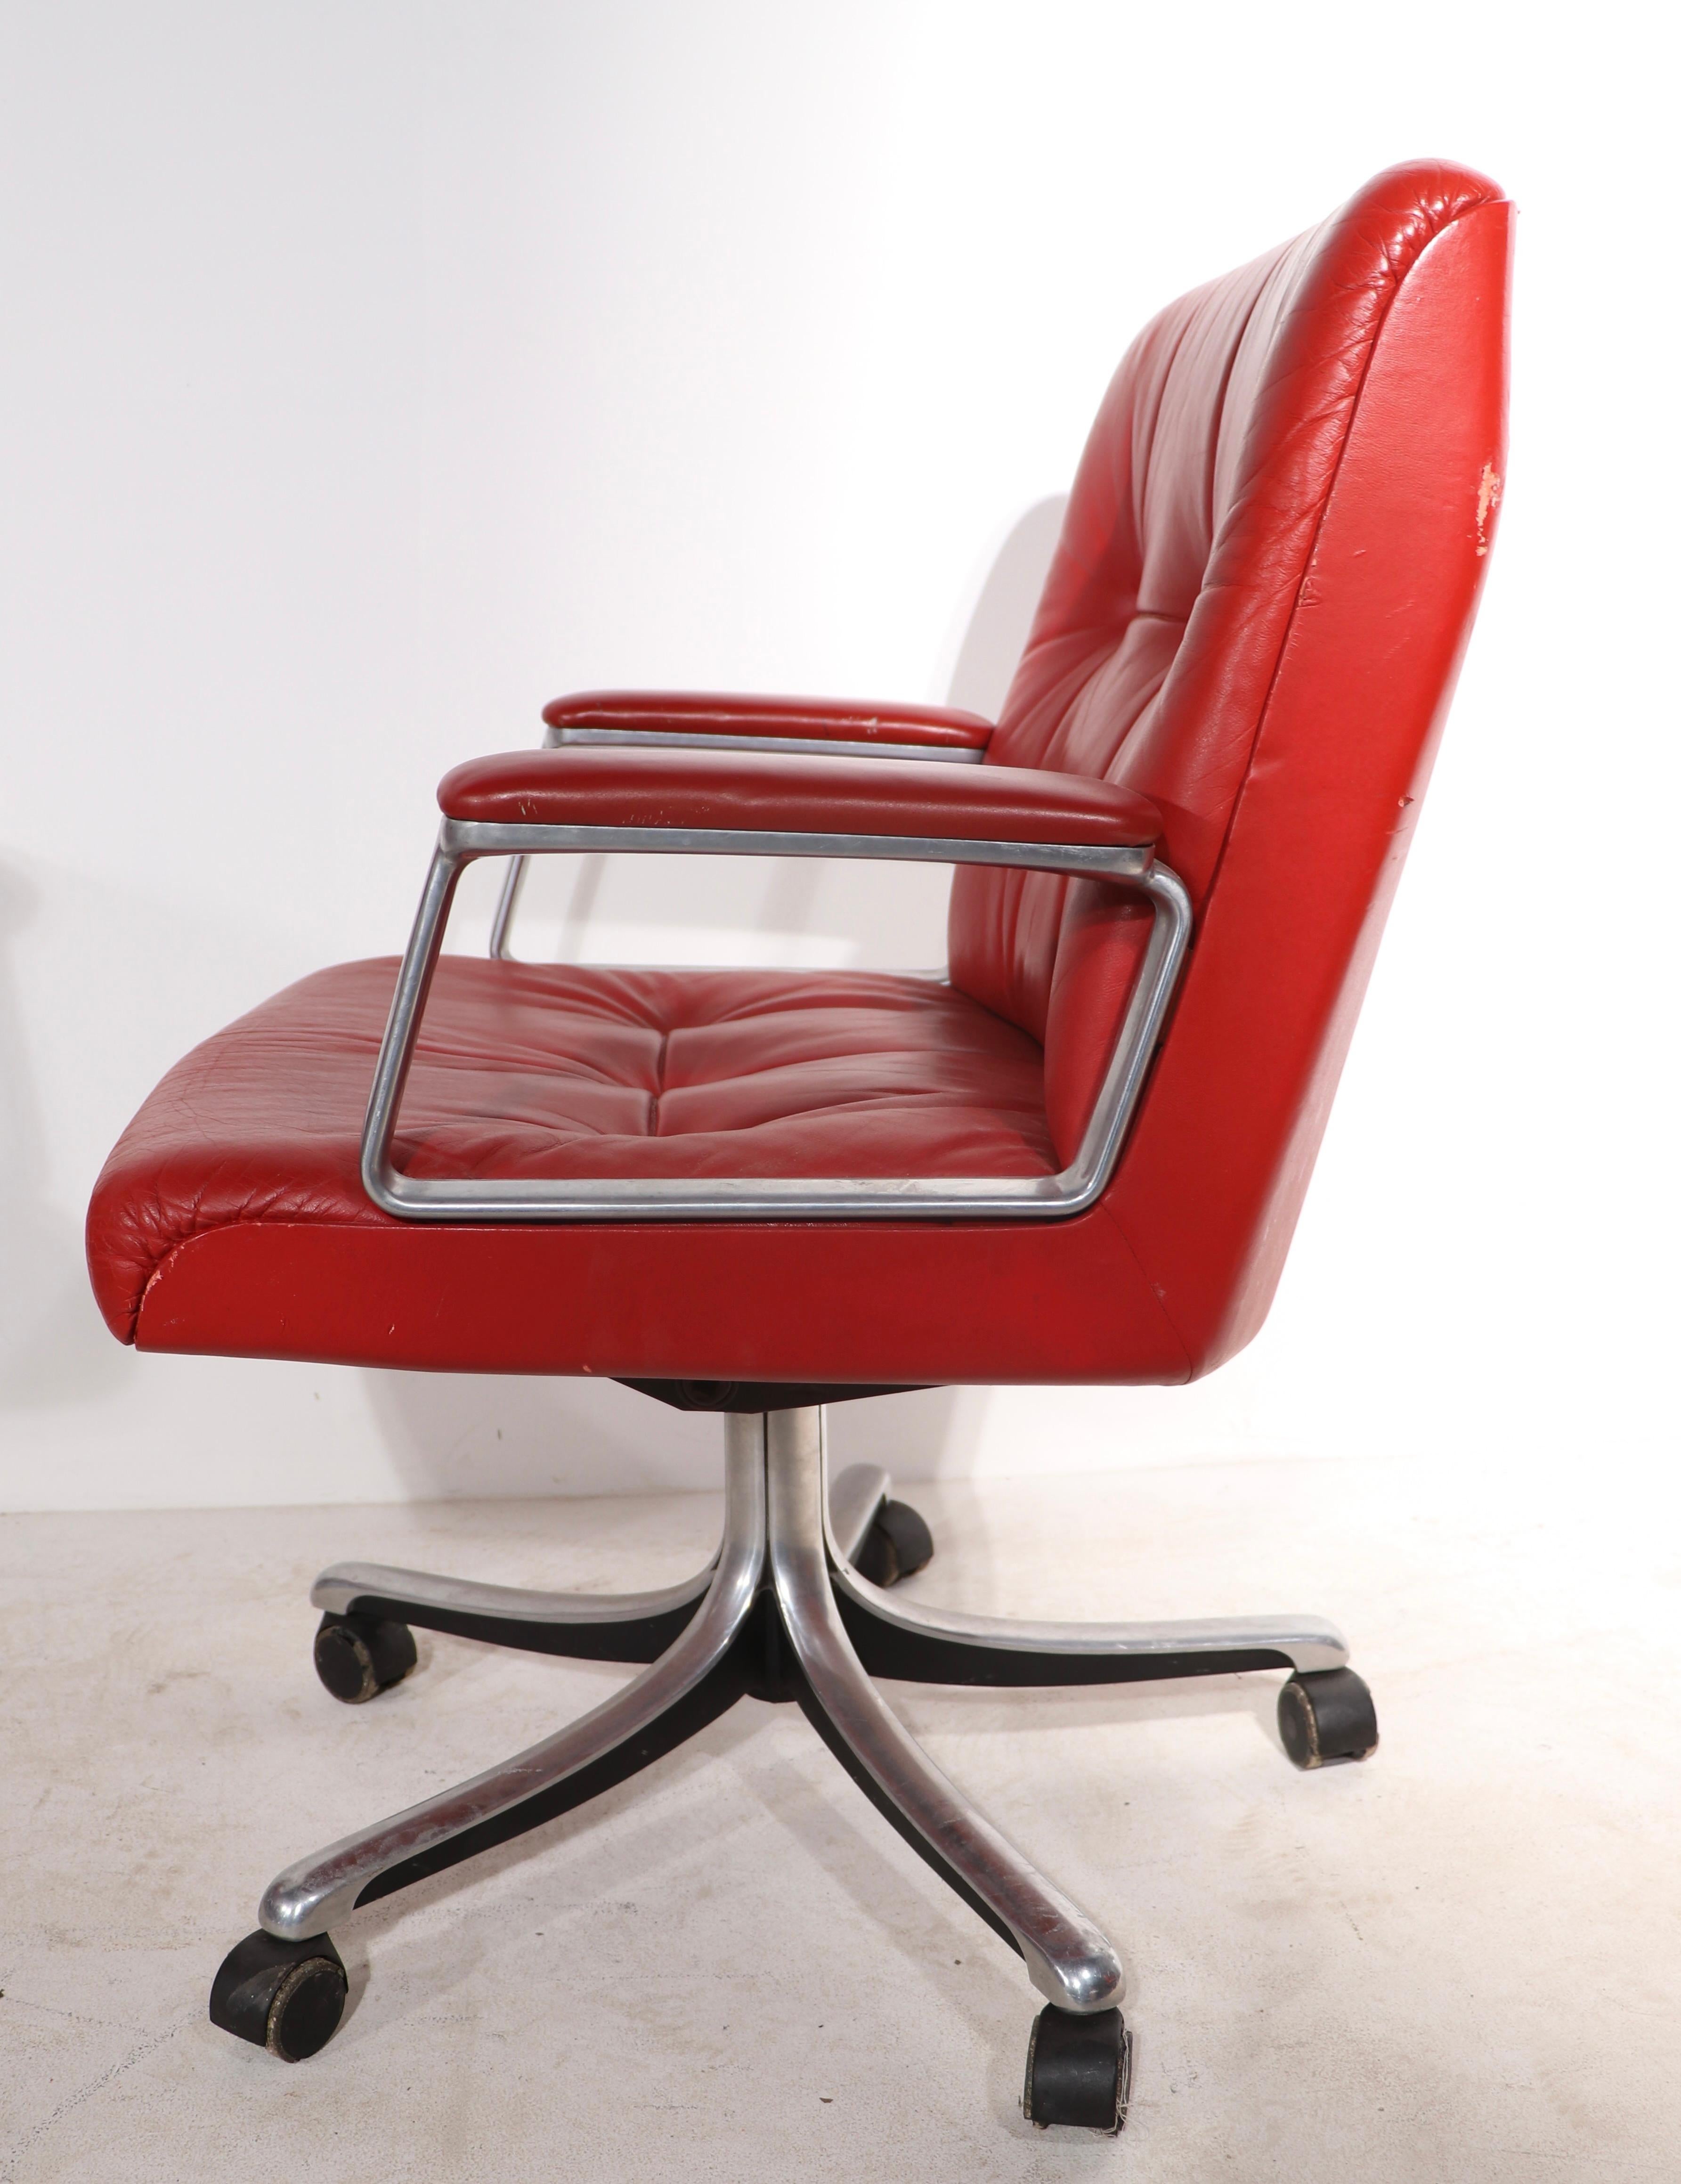 8 P128 Borsani Swivel Desk Chairs in Lipstick Red Leather Upholstery  8